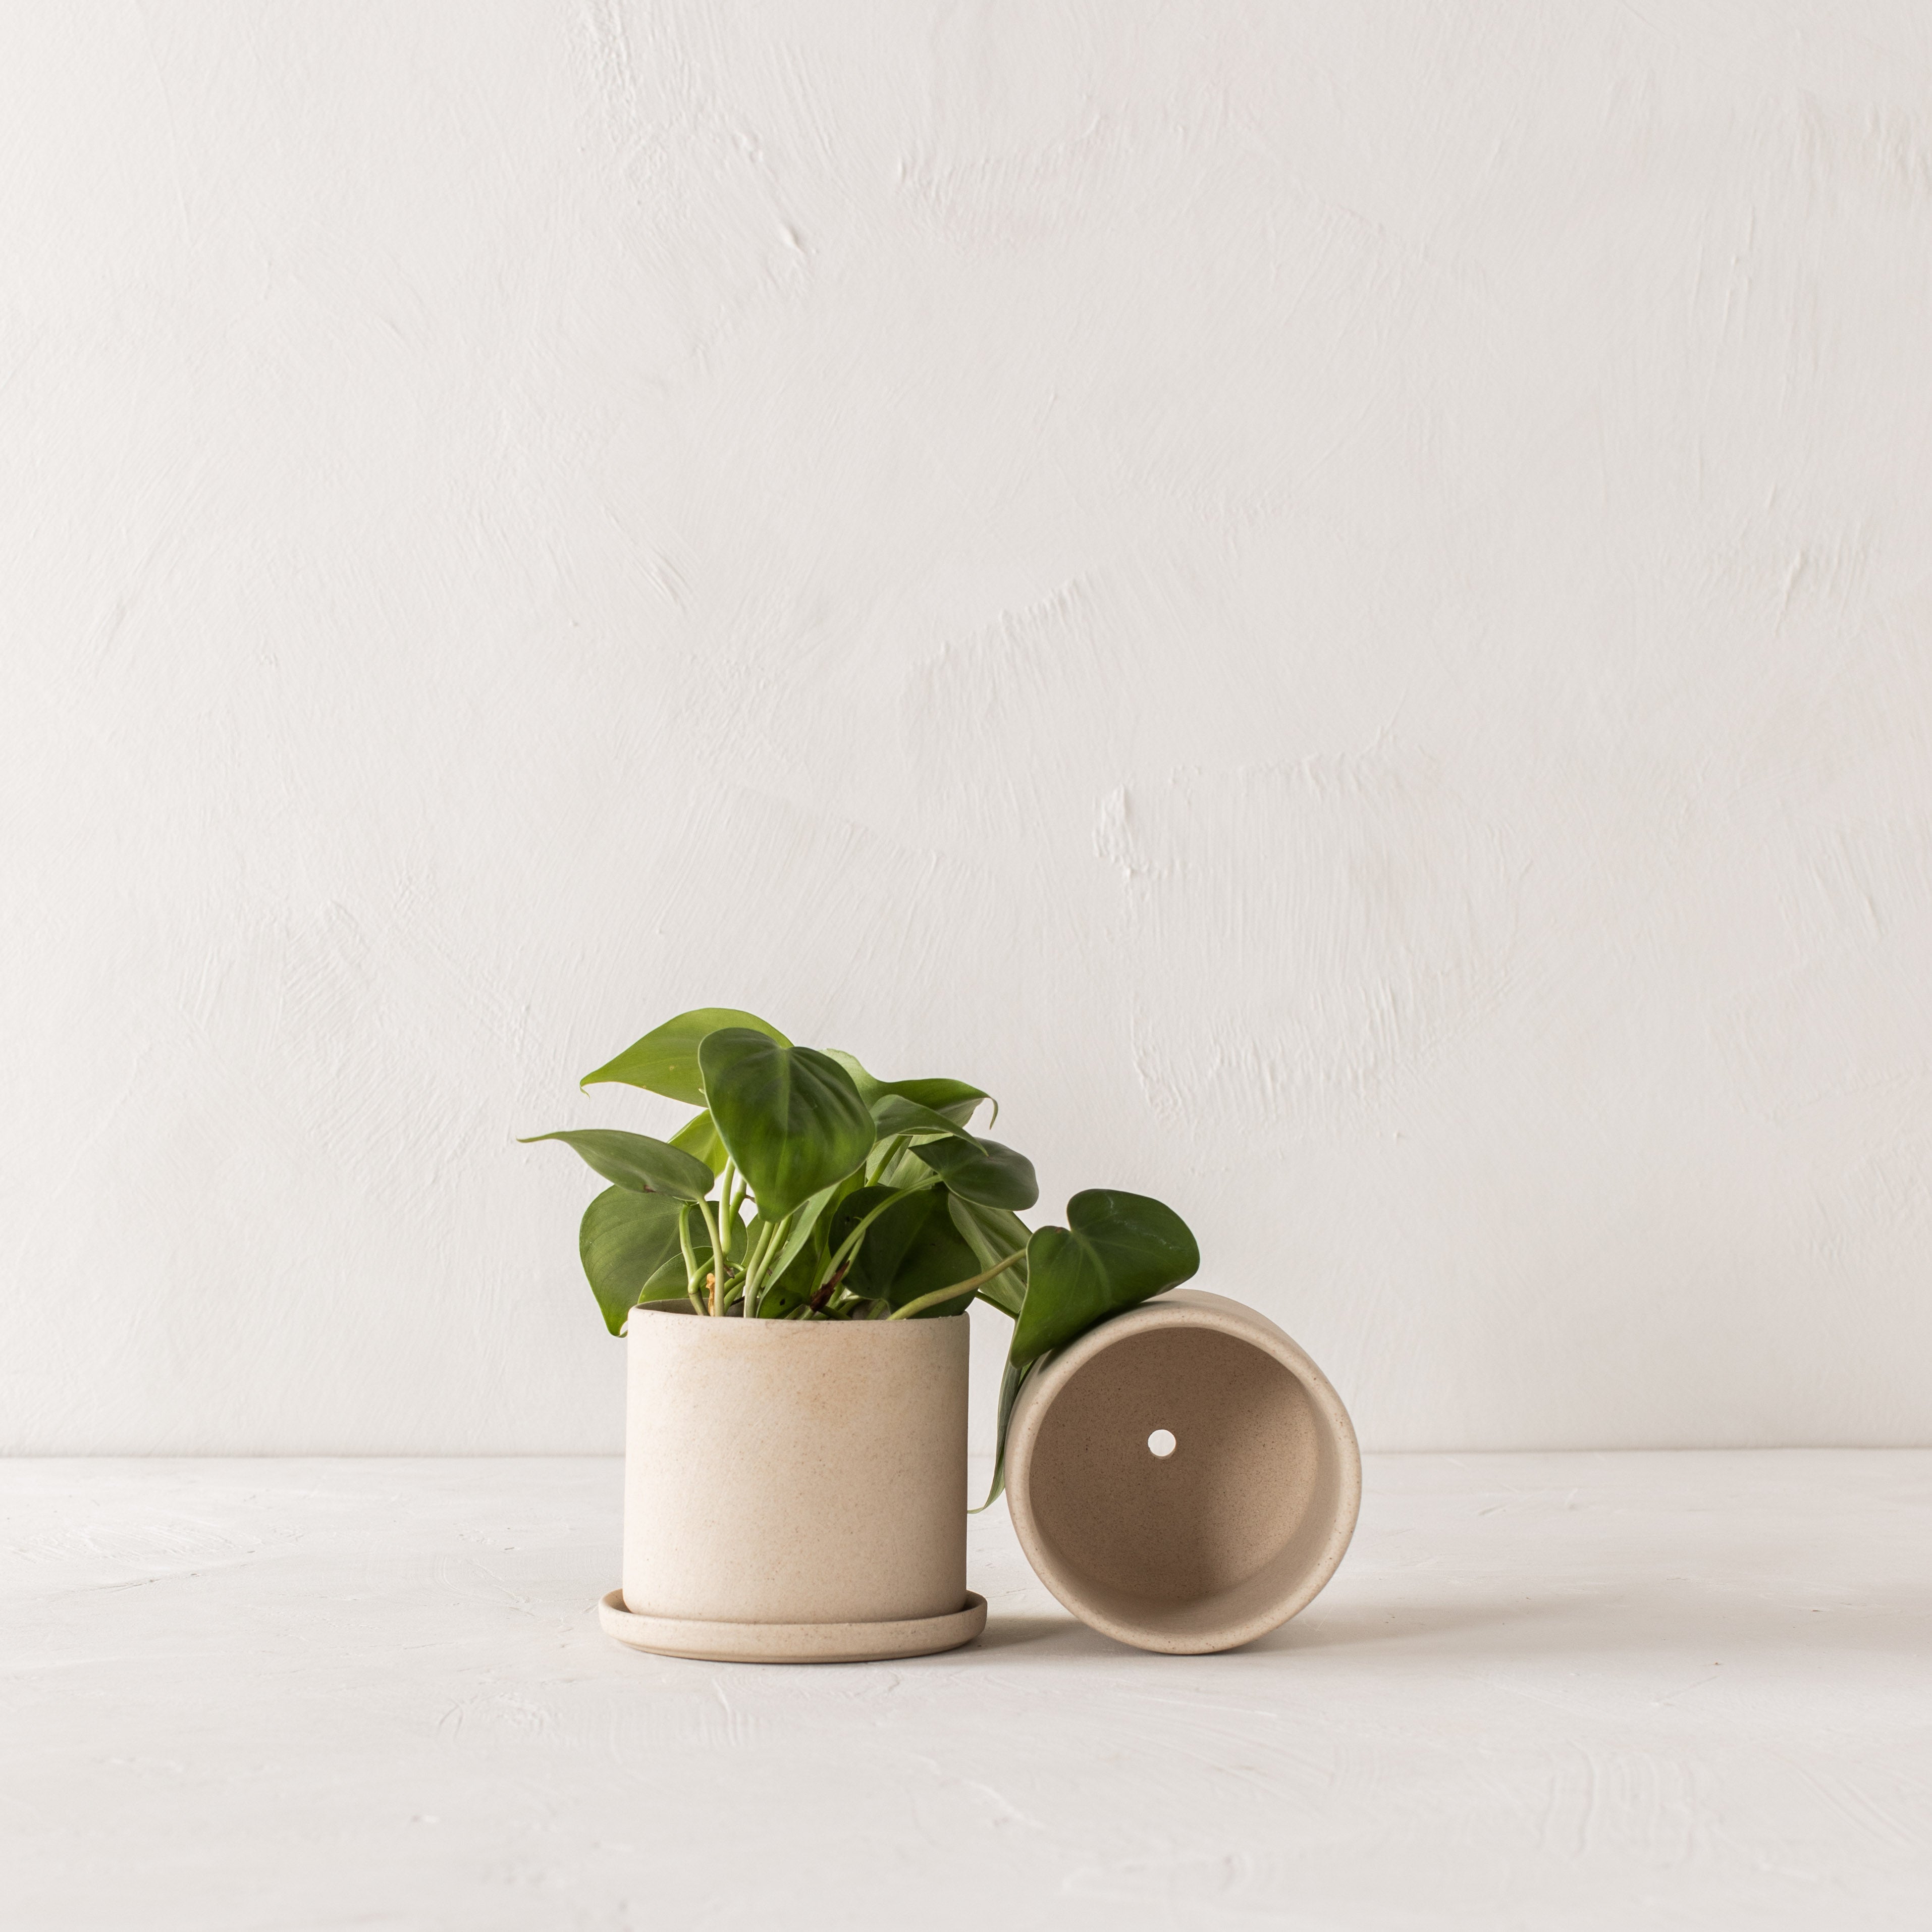 Two stoneware minimal ceramic planters with bottom drainage dish. Second planter lays on its side to show its drainage hole. Pothos plant inside. Handmade stoneware ceramic planter, designed by Convivial Production, sold by Shop Verdant, Kansas City. Mo plant store. 